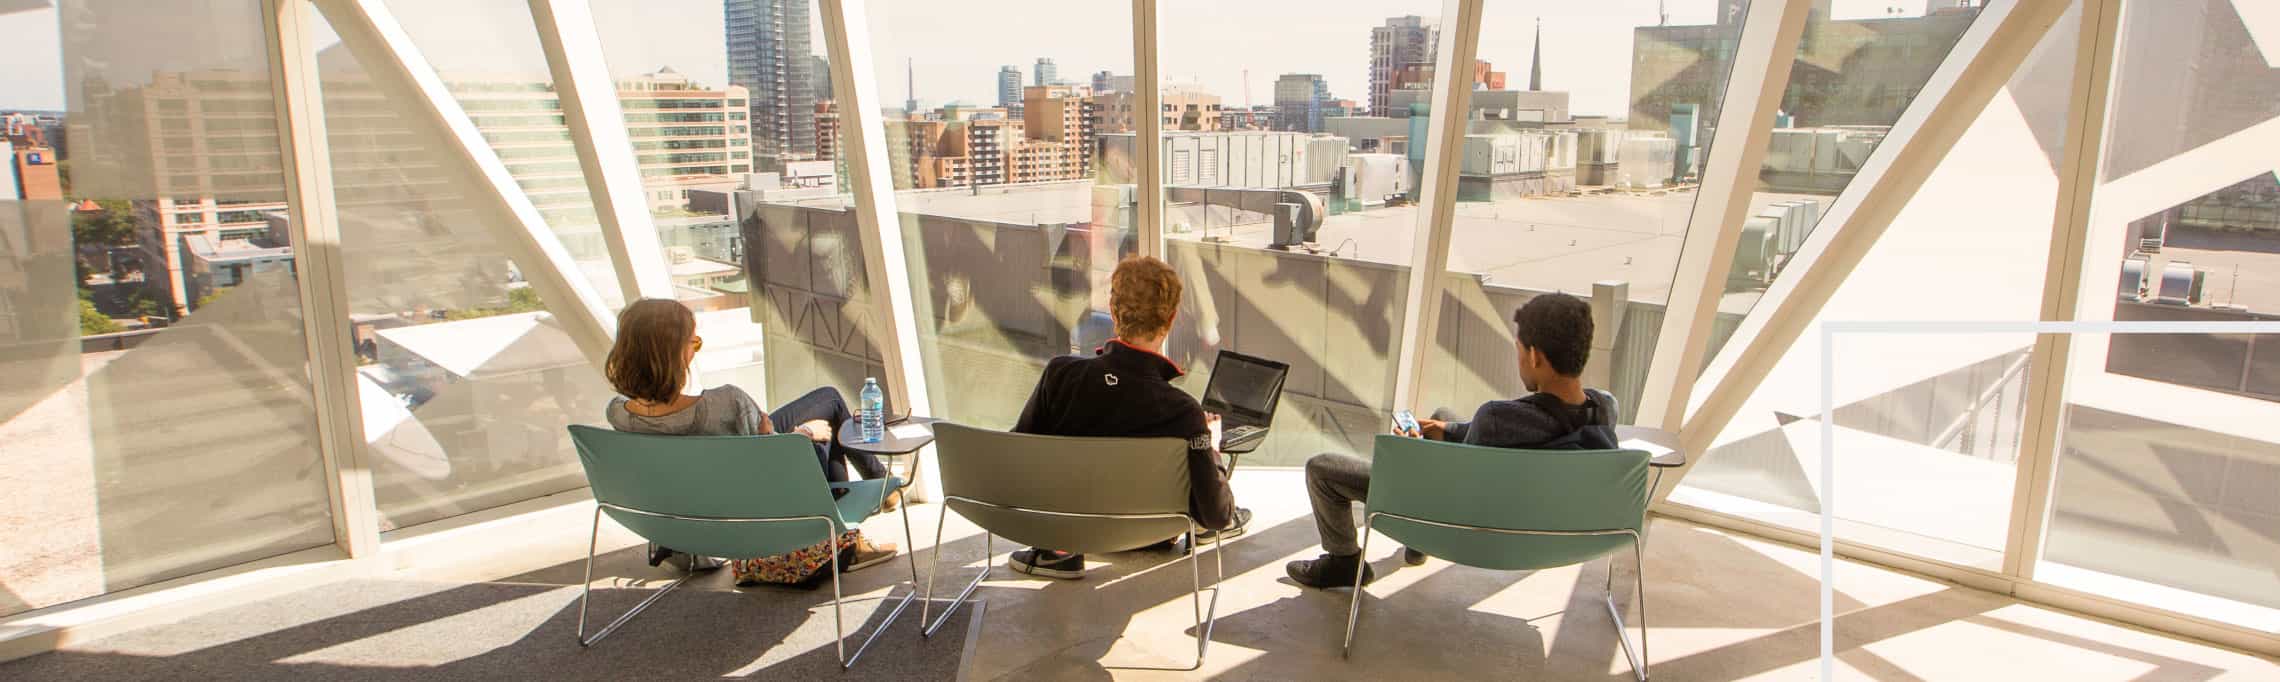 three students sitting inside the Student Learning Centre facing tall windows looking out to the city